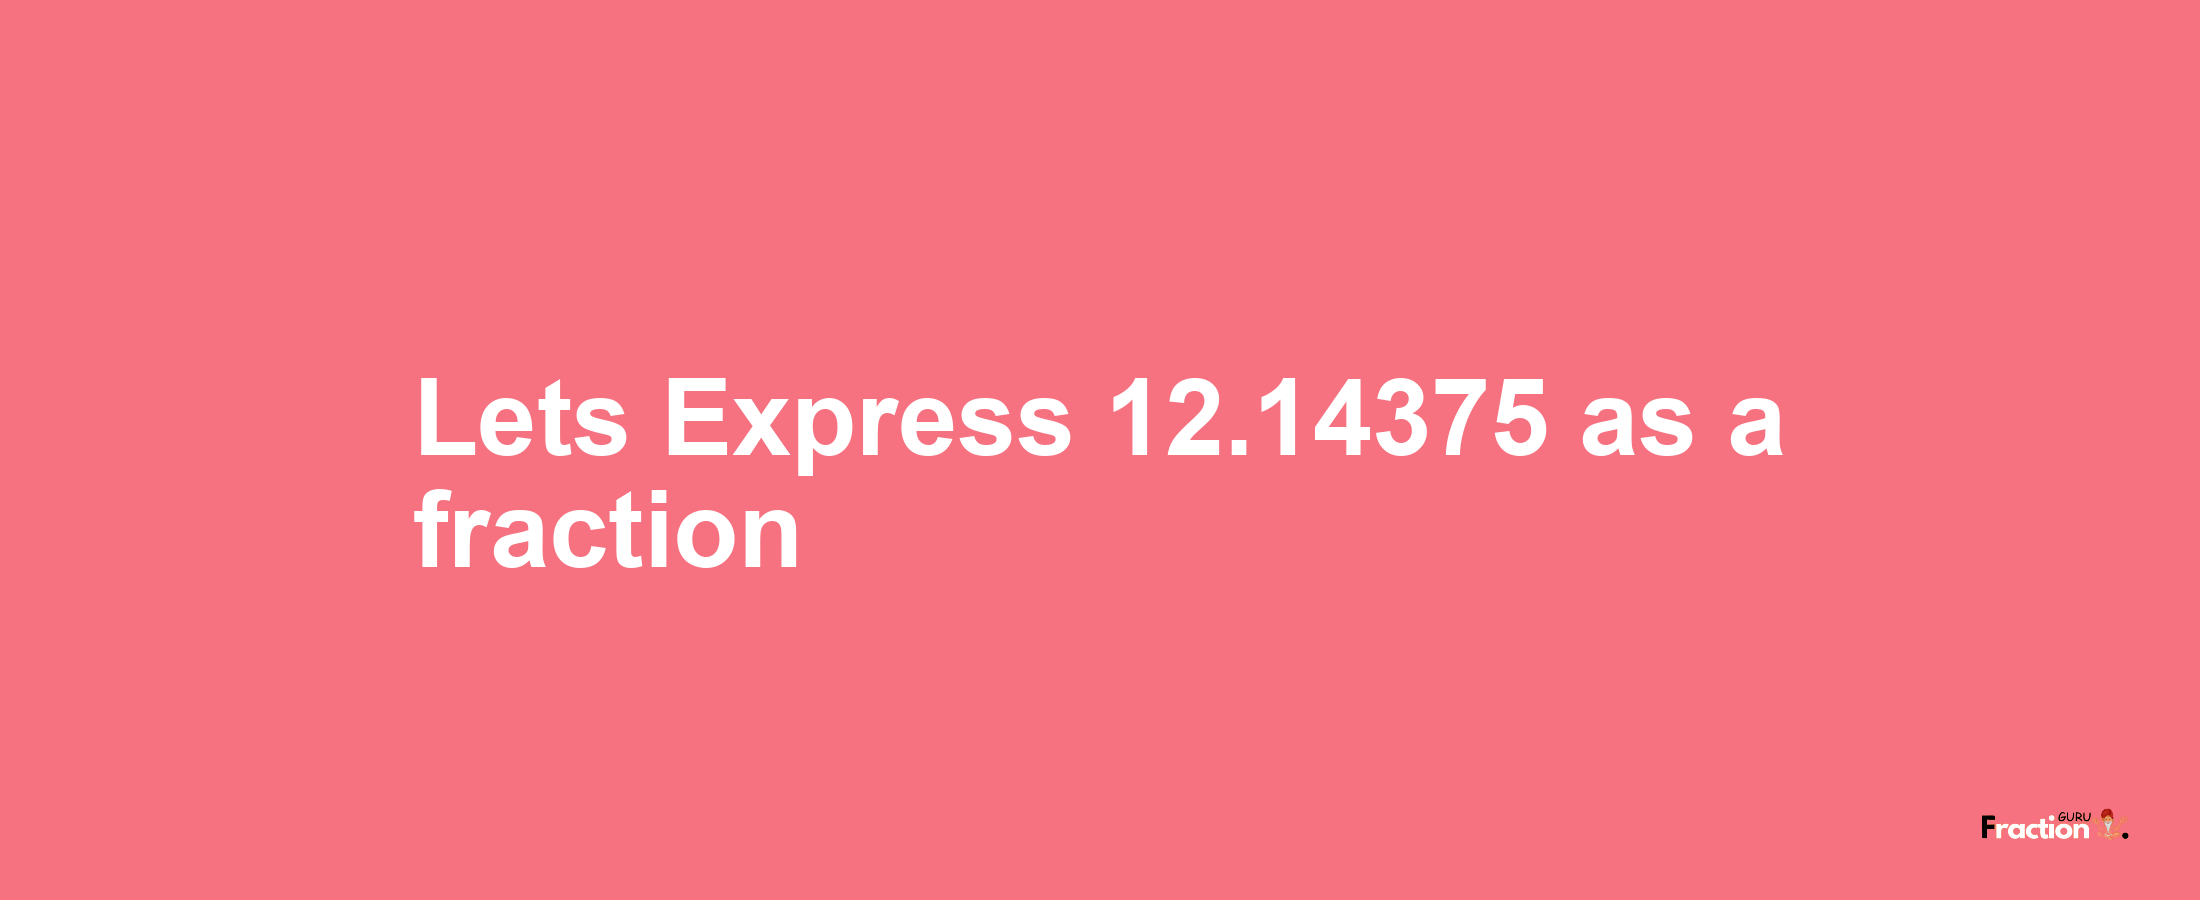 Lets Express 12.14375 as afraction